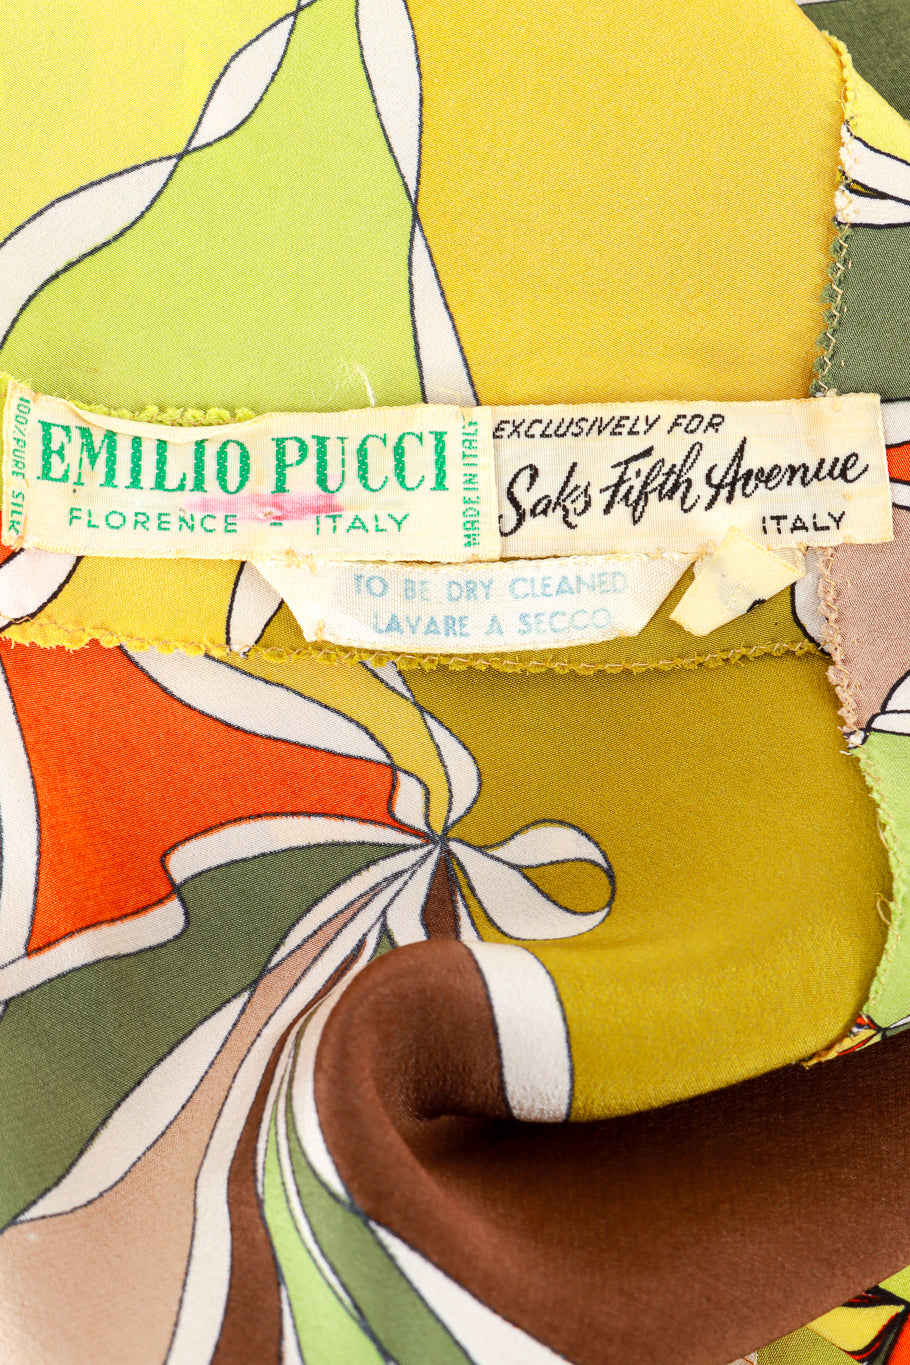 Vintage Emilio Pucci ruffle tunic high waisted trouser set flat lay detail of the makers label reading 'Emilio Pucci